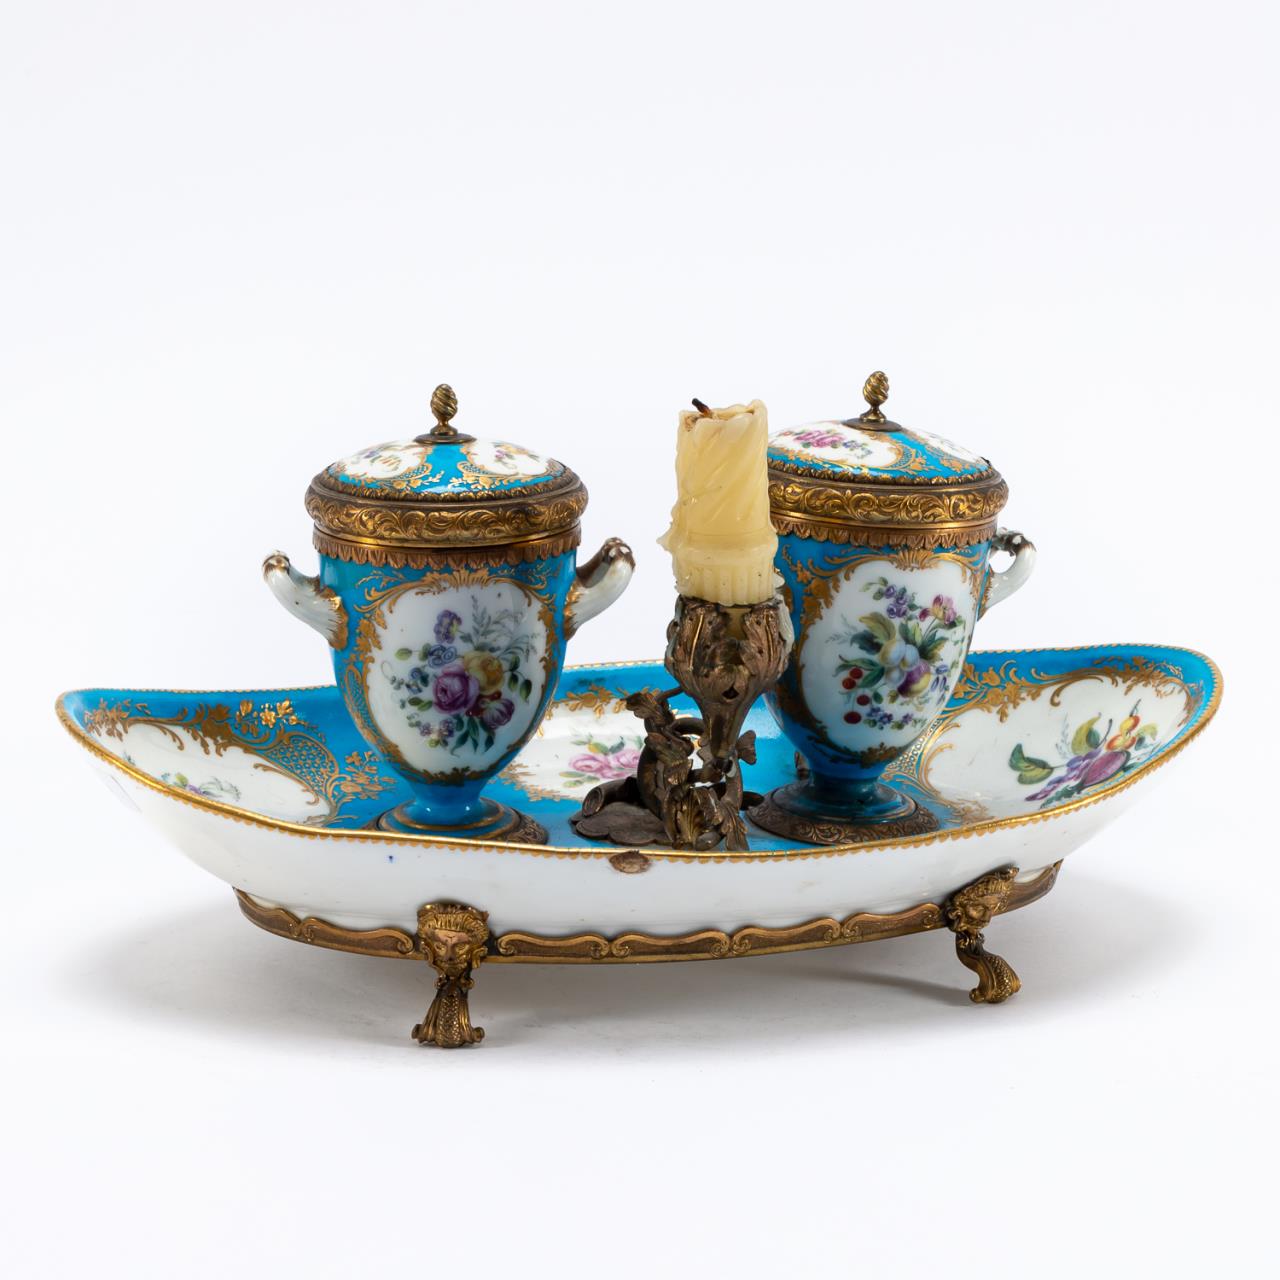 19TH C. SEVRES-STYLE BRONZED MOUNTED